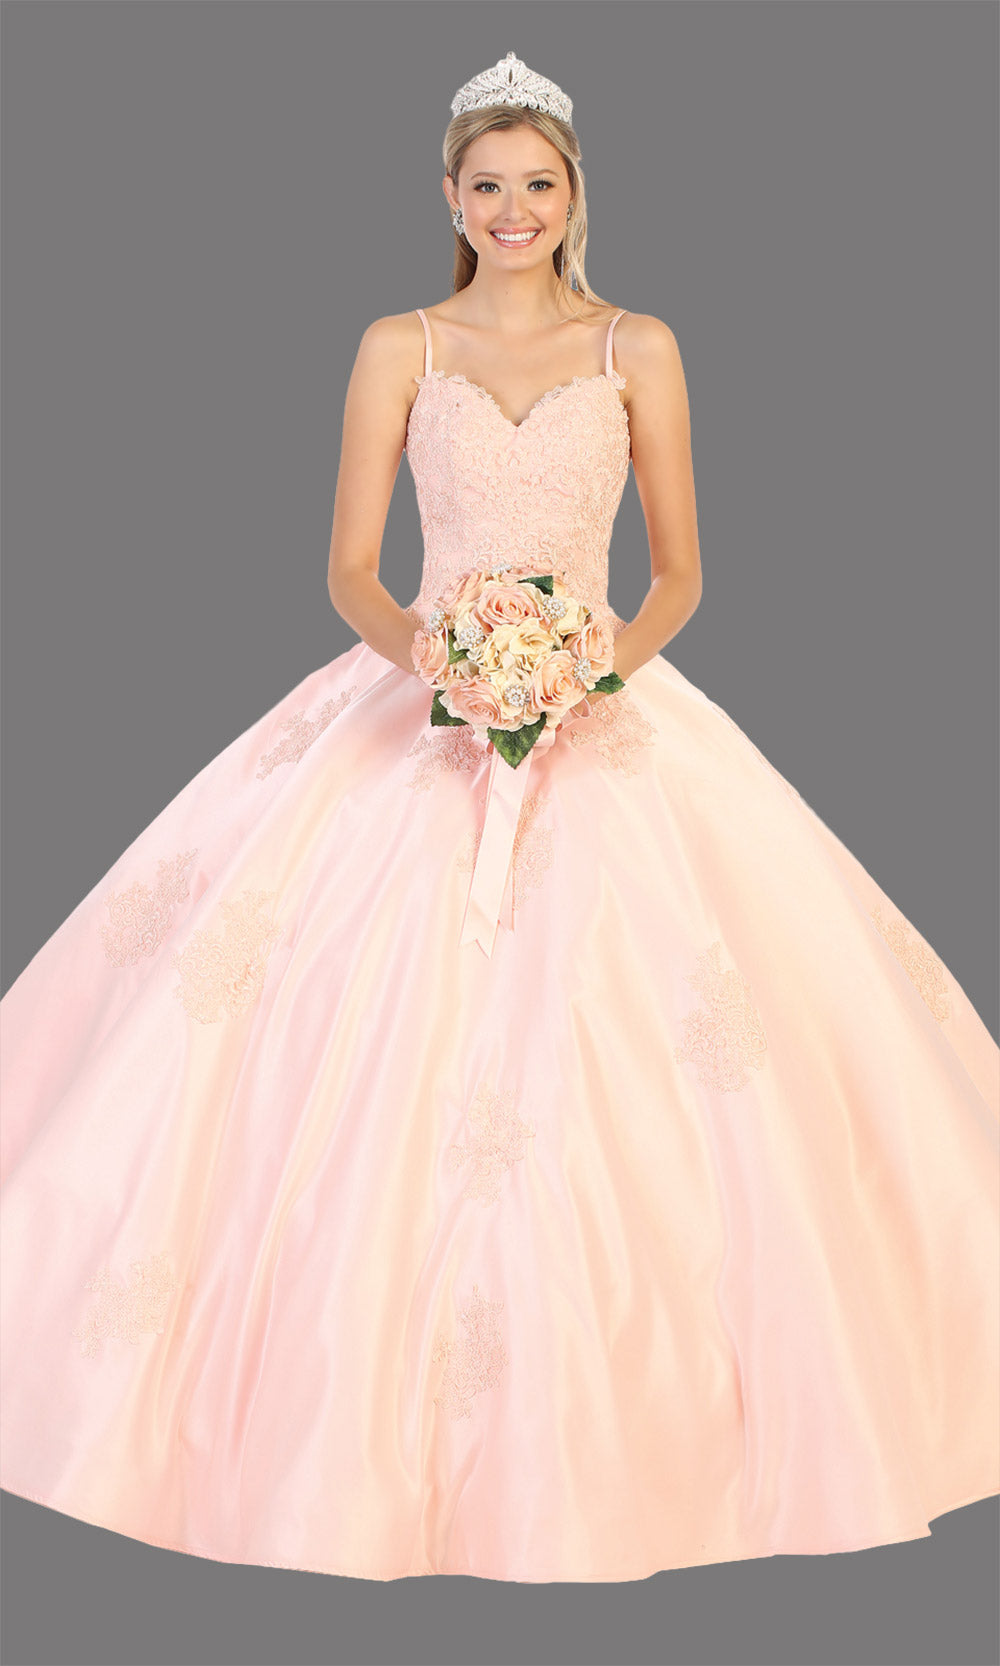 Mayqueen LK139 blush pink lace quinceanera v neck w/straps ball gown. Light pink simple ball gown is perfect for engagement dress, wedding reception, indowestern party gown, sweet 16, debut, sweet 15, sweet 18. Plus sizes available for ballgowns.jpg